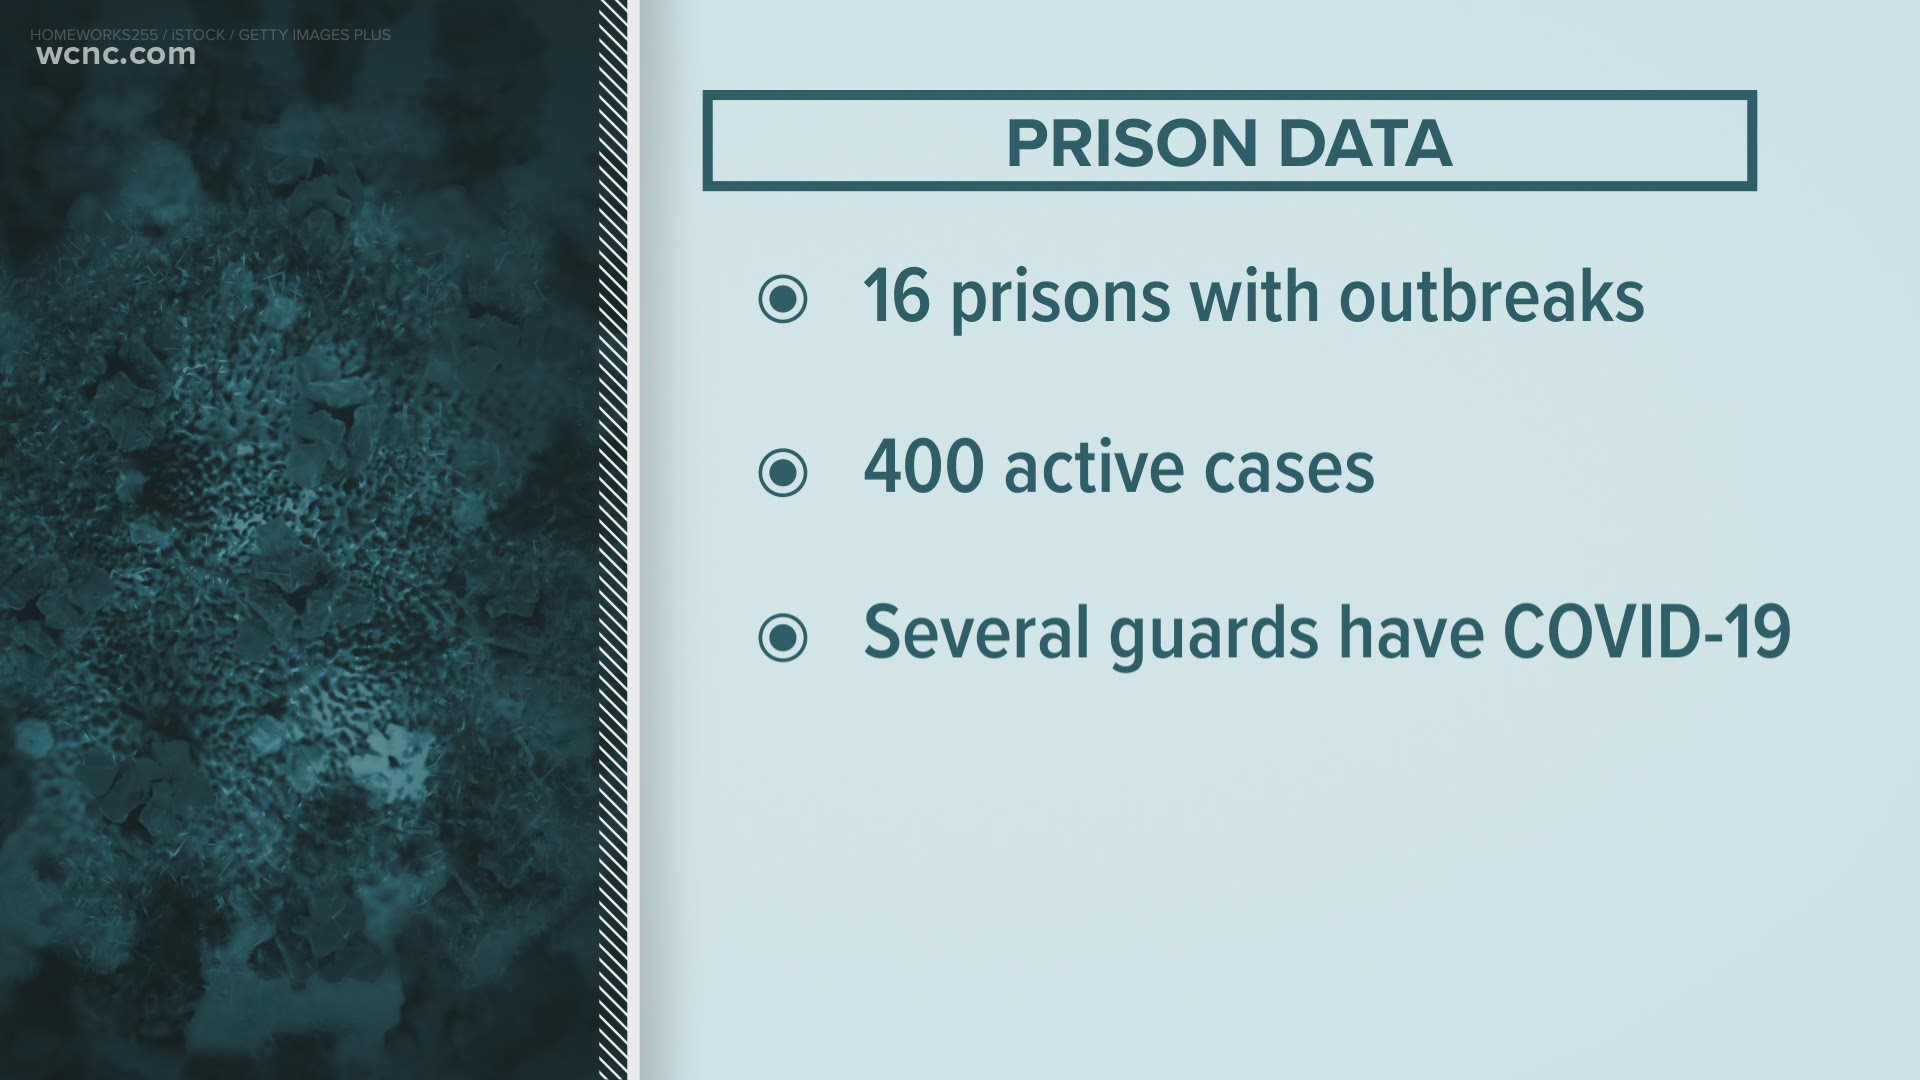 The North Carolina Department of Public Safety reports more than 400 active COVID-19 cases across the state and outbreaks in 16 prisons.